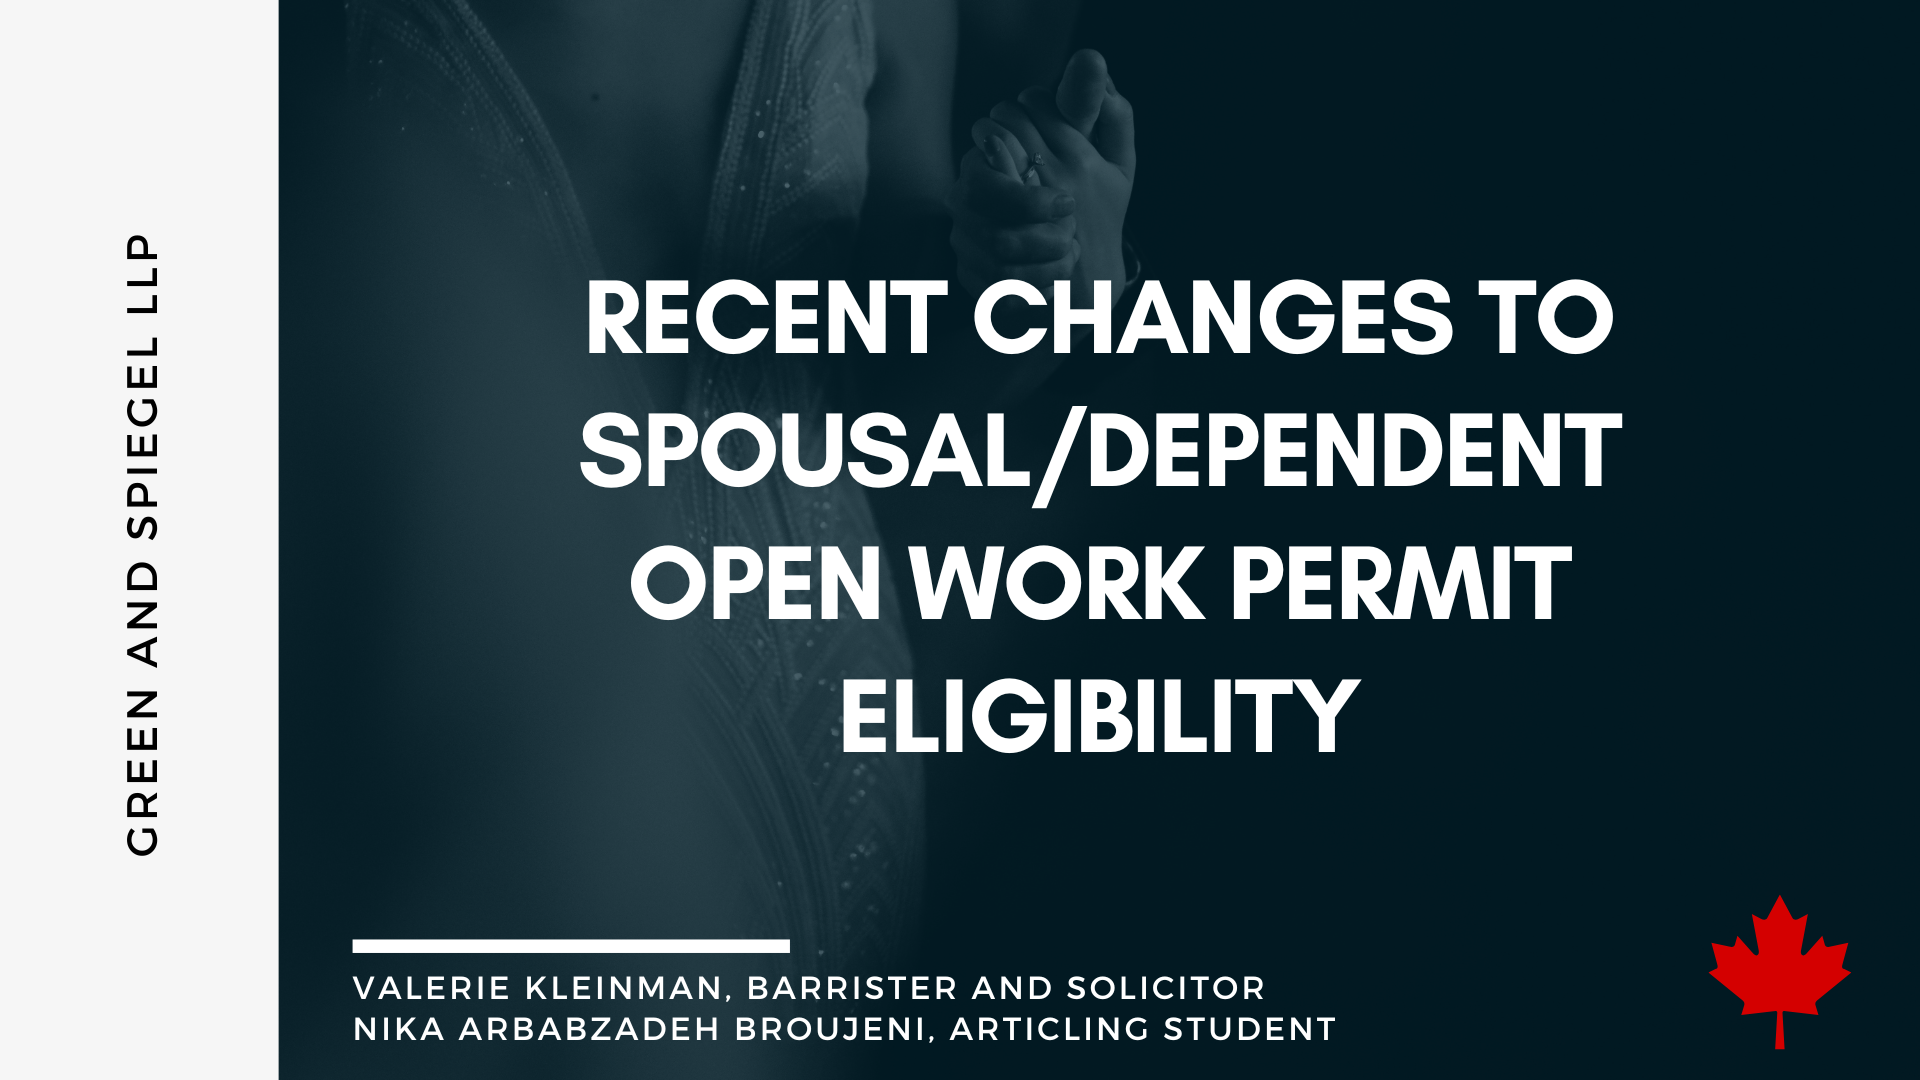  RECENT CHANGES TO SPOUSAL/DEPENDENT OPEN WORK PERMIT ELIGIBILITY 